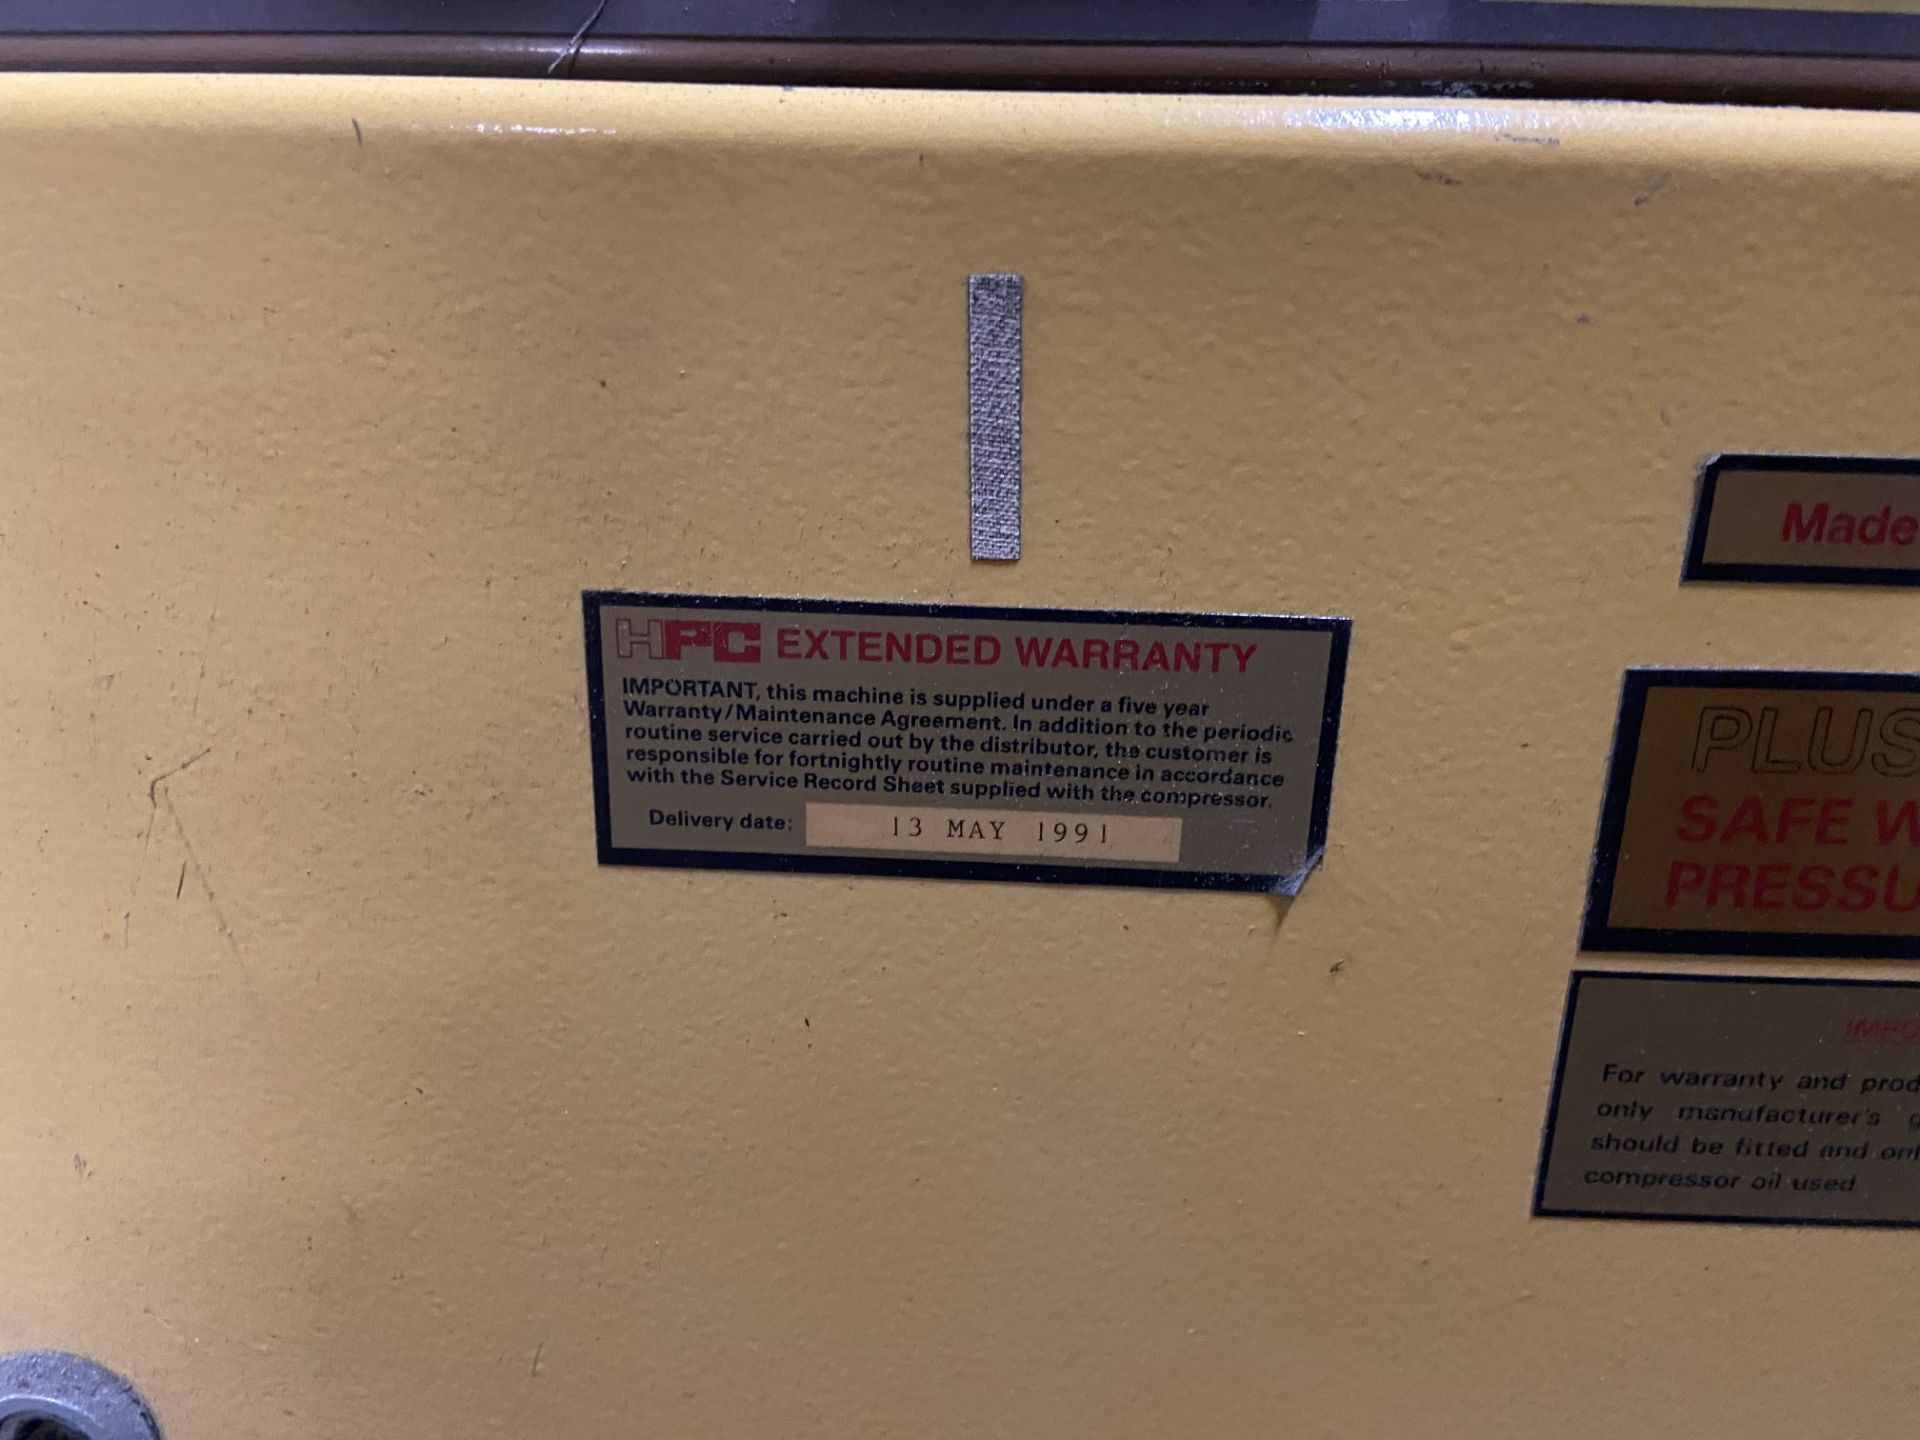 HPC AS45 Sigma Packaged Screw Compressor, year of manufacture 1991, 7.5 bar safe working pressure, - Image 5 of 5